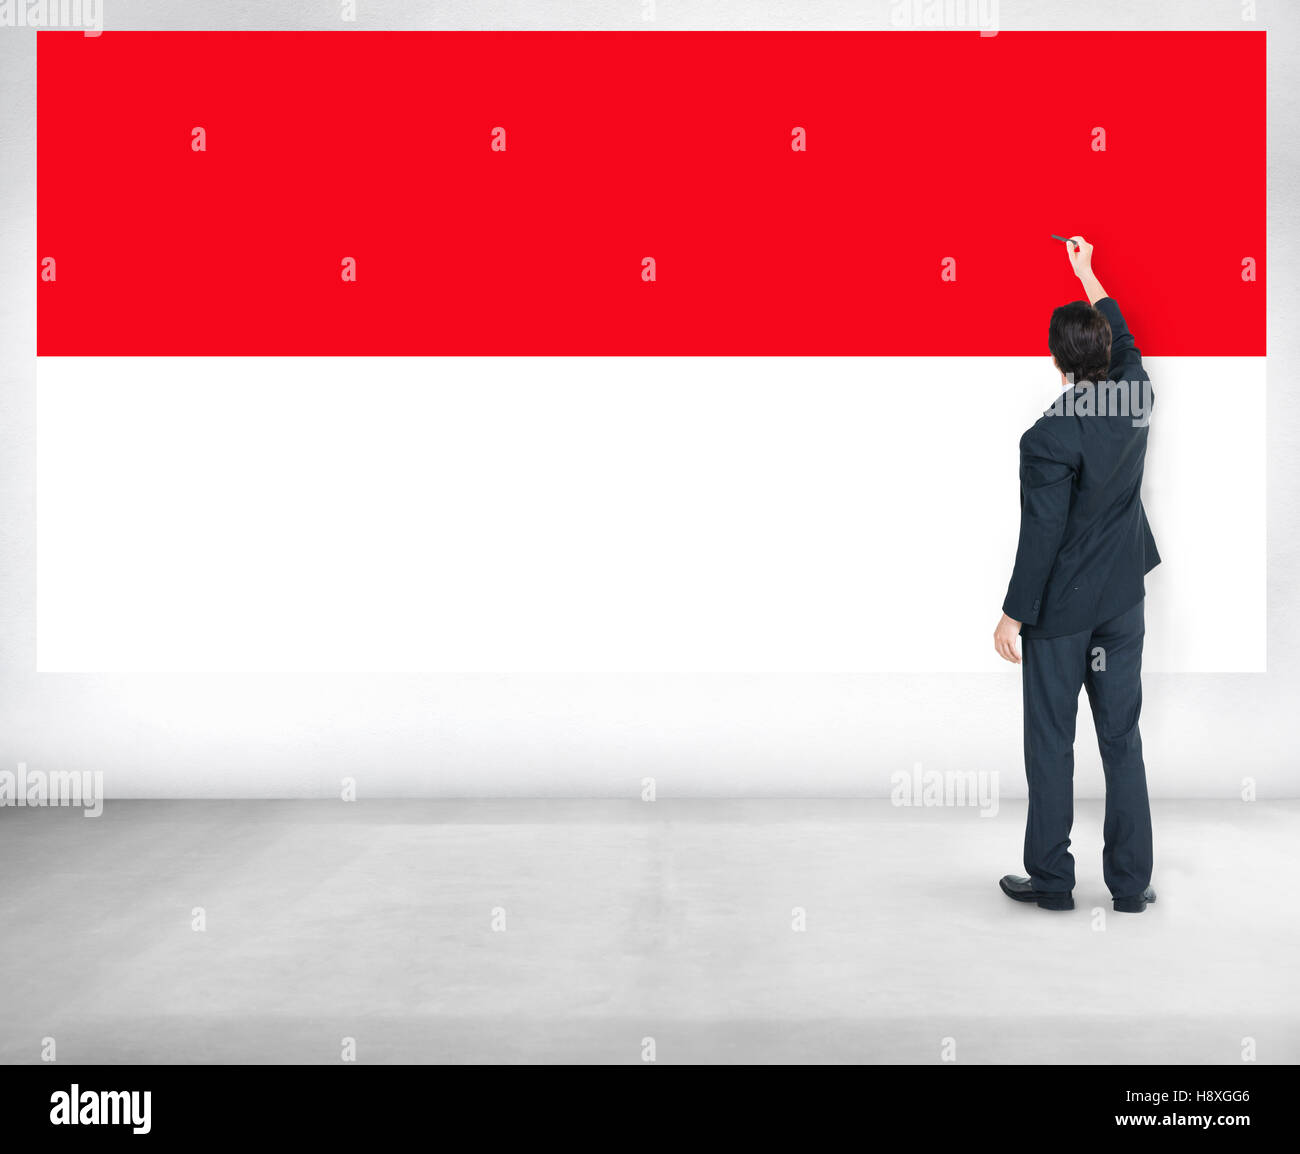 Indonesia Flag Country Nationality Liberty Concept Stock Photo